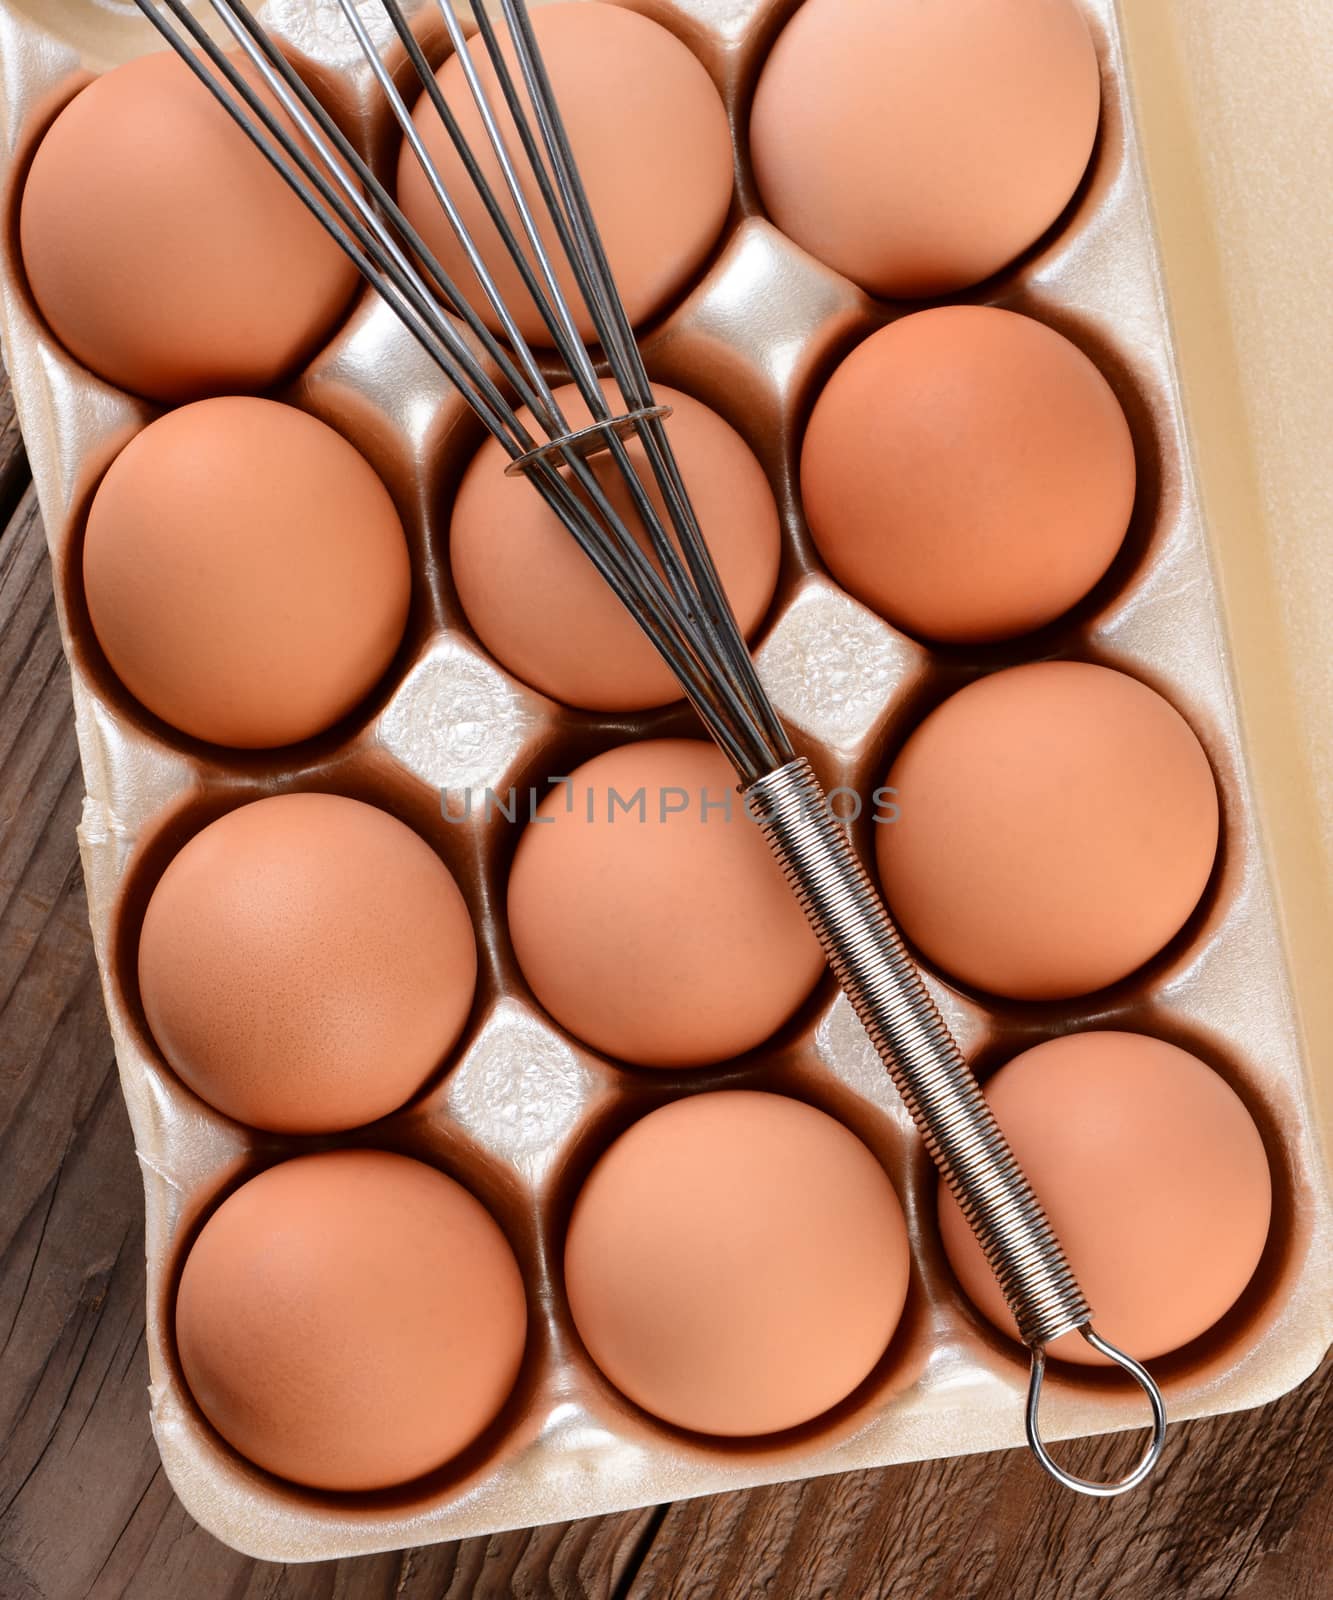 Egg Carton With Wisk by sCukrov